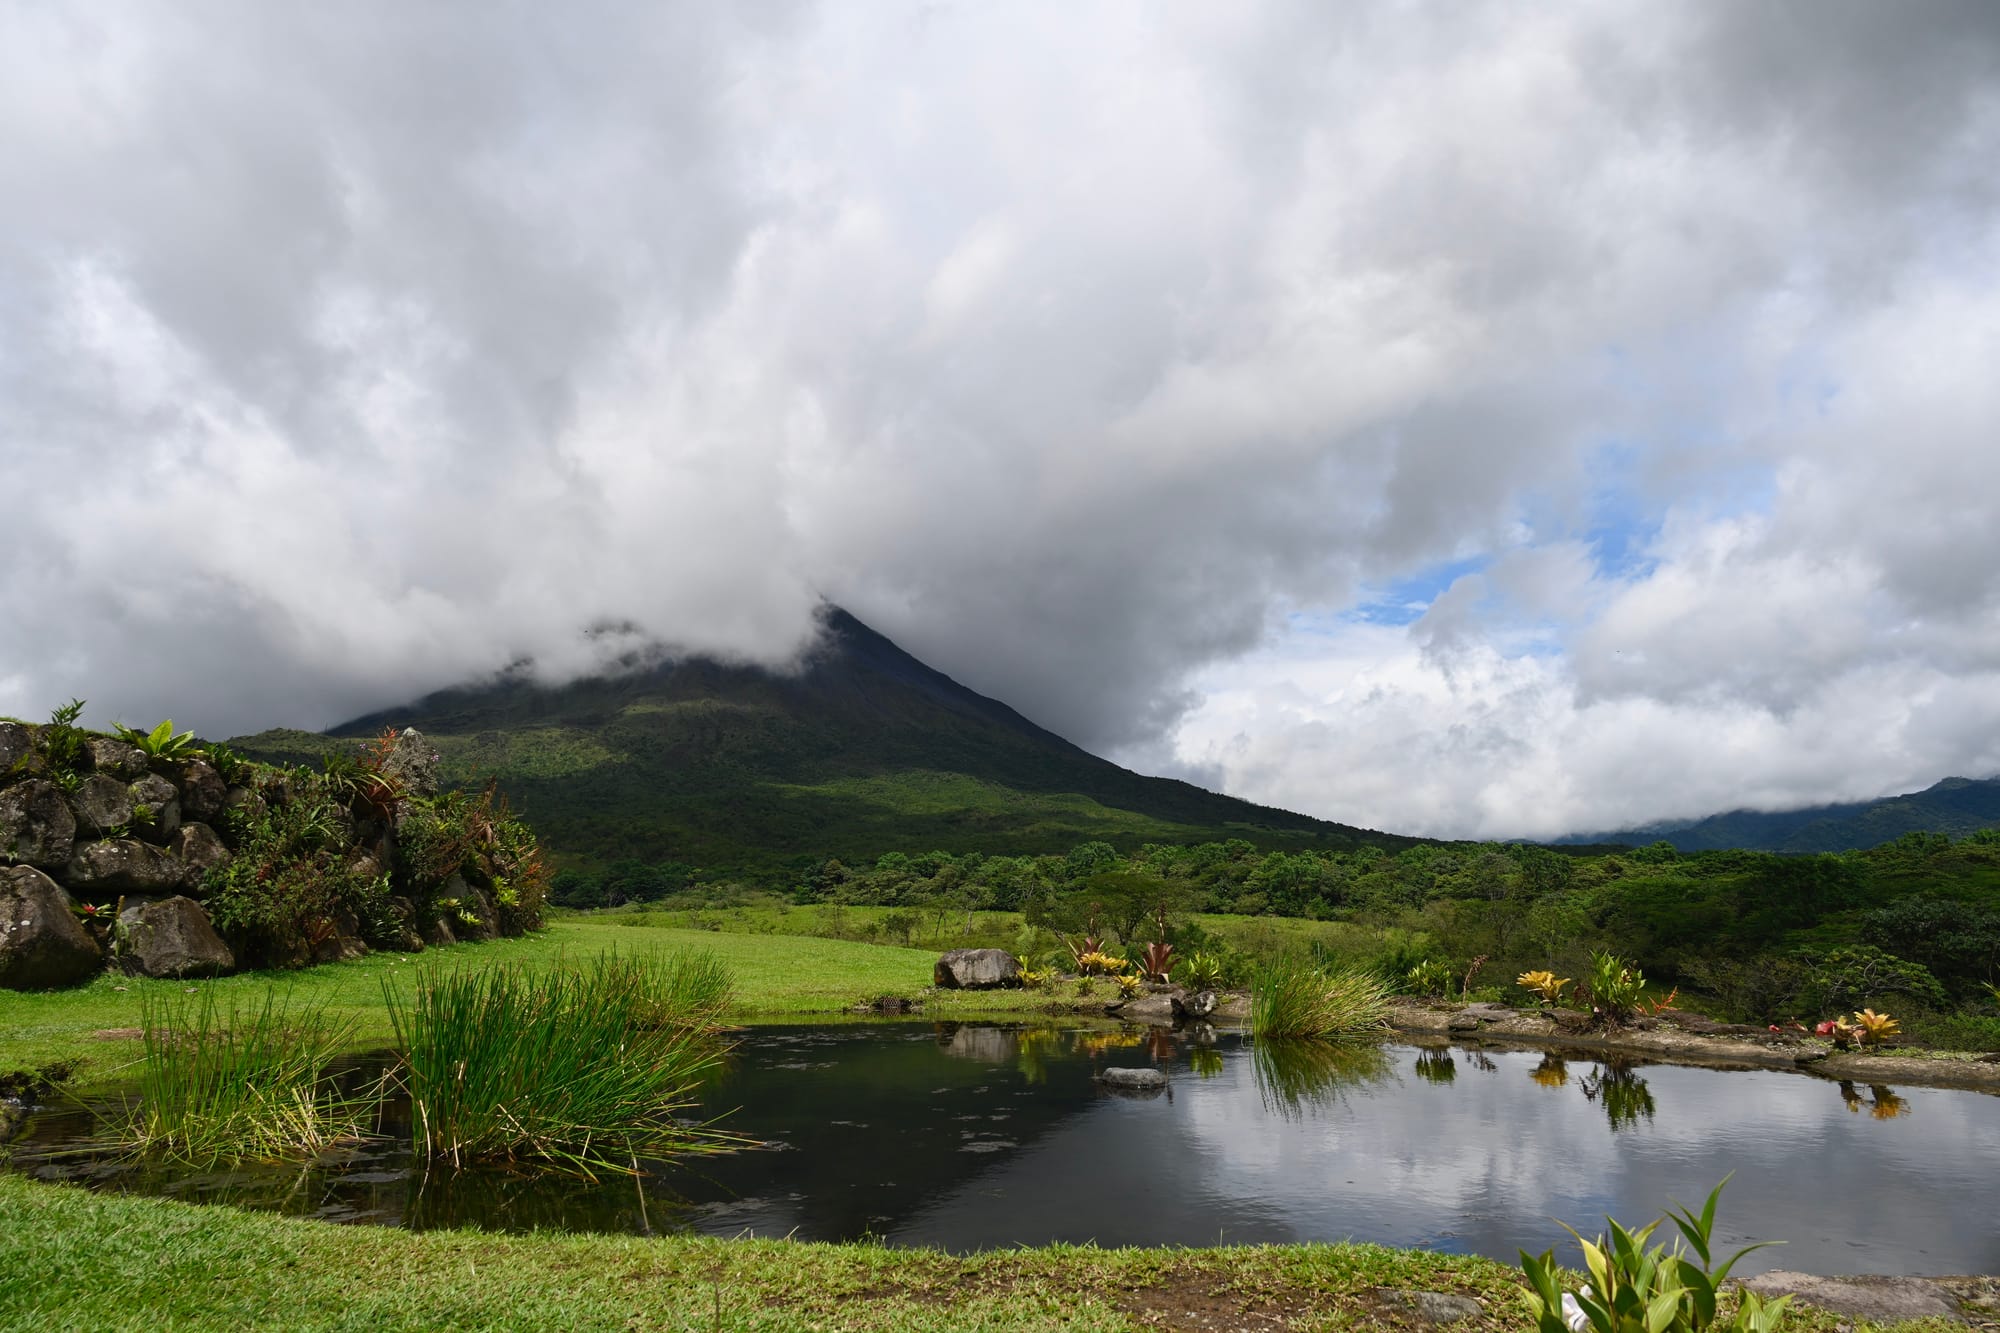 A Visual Journey to Arenal, Costa Rica